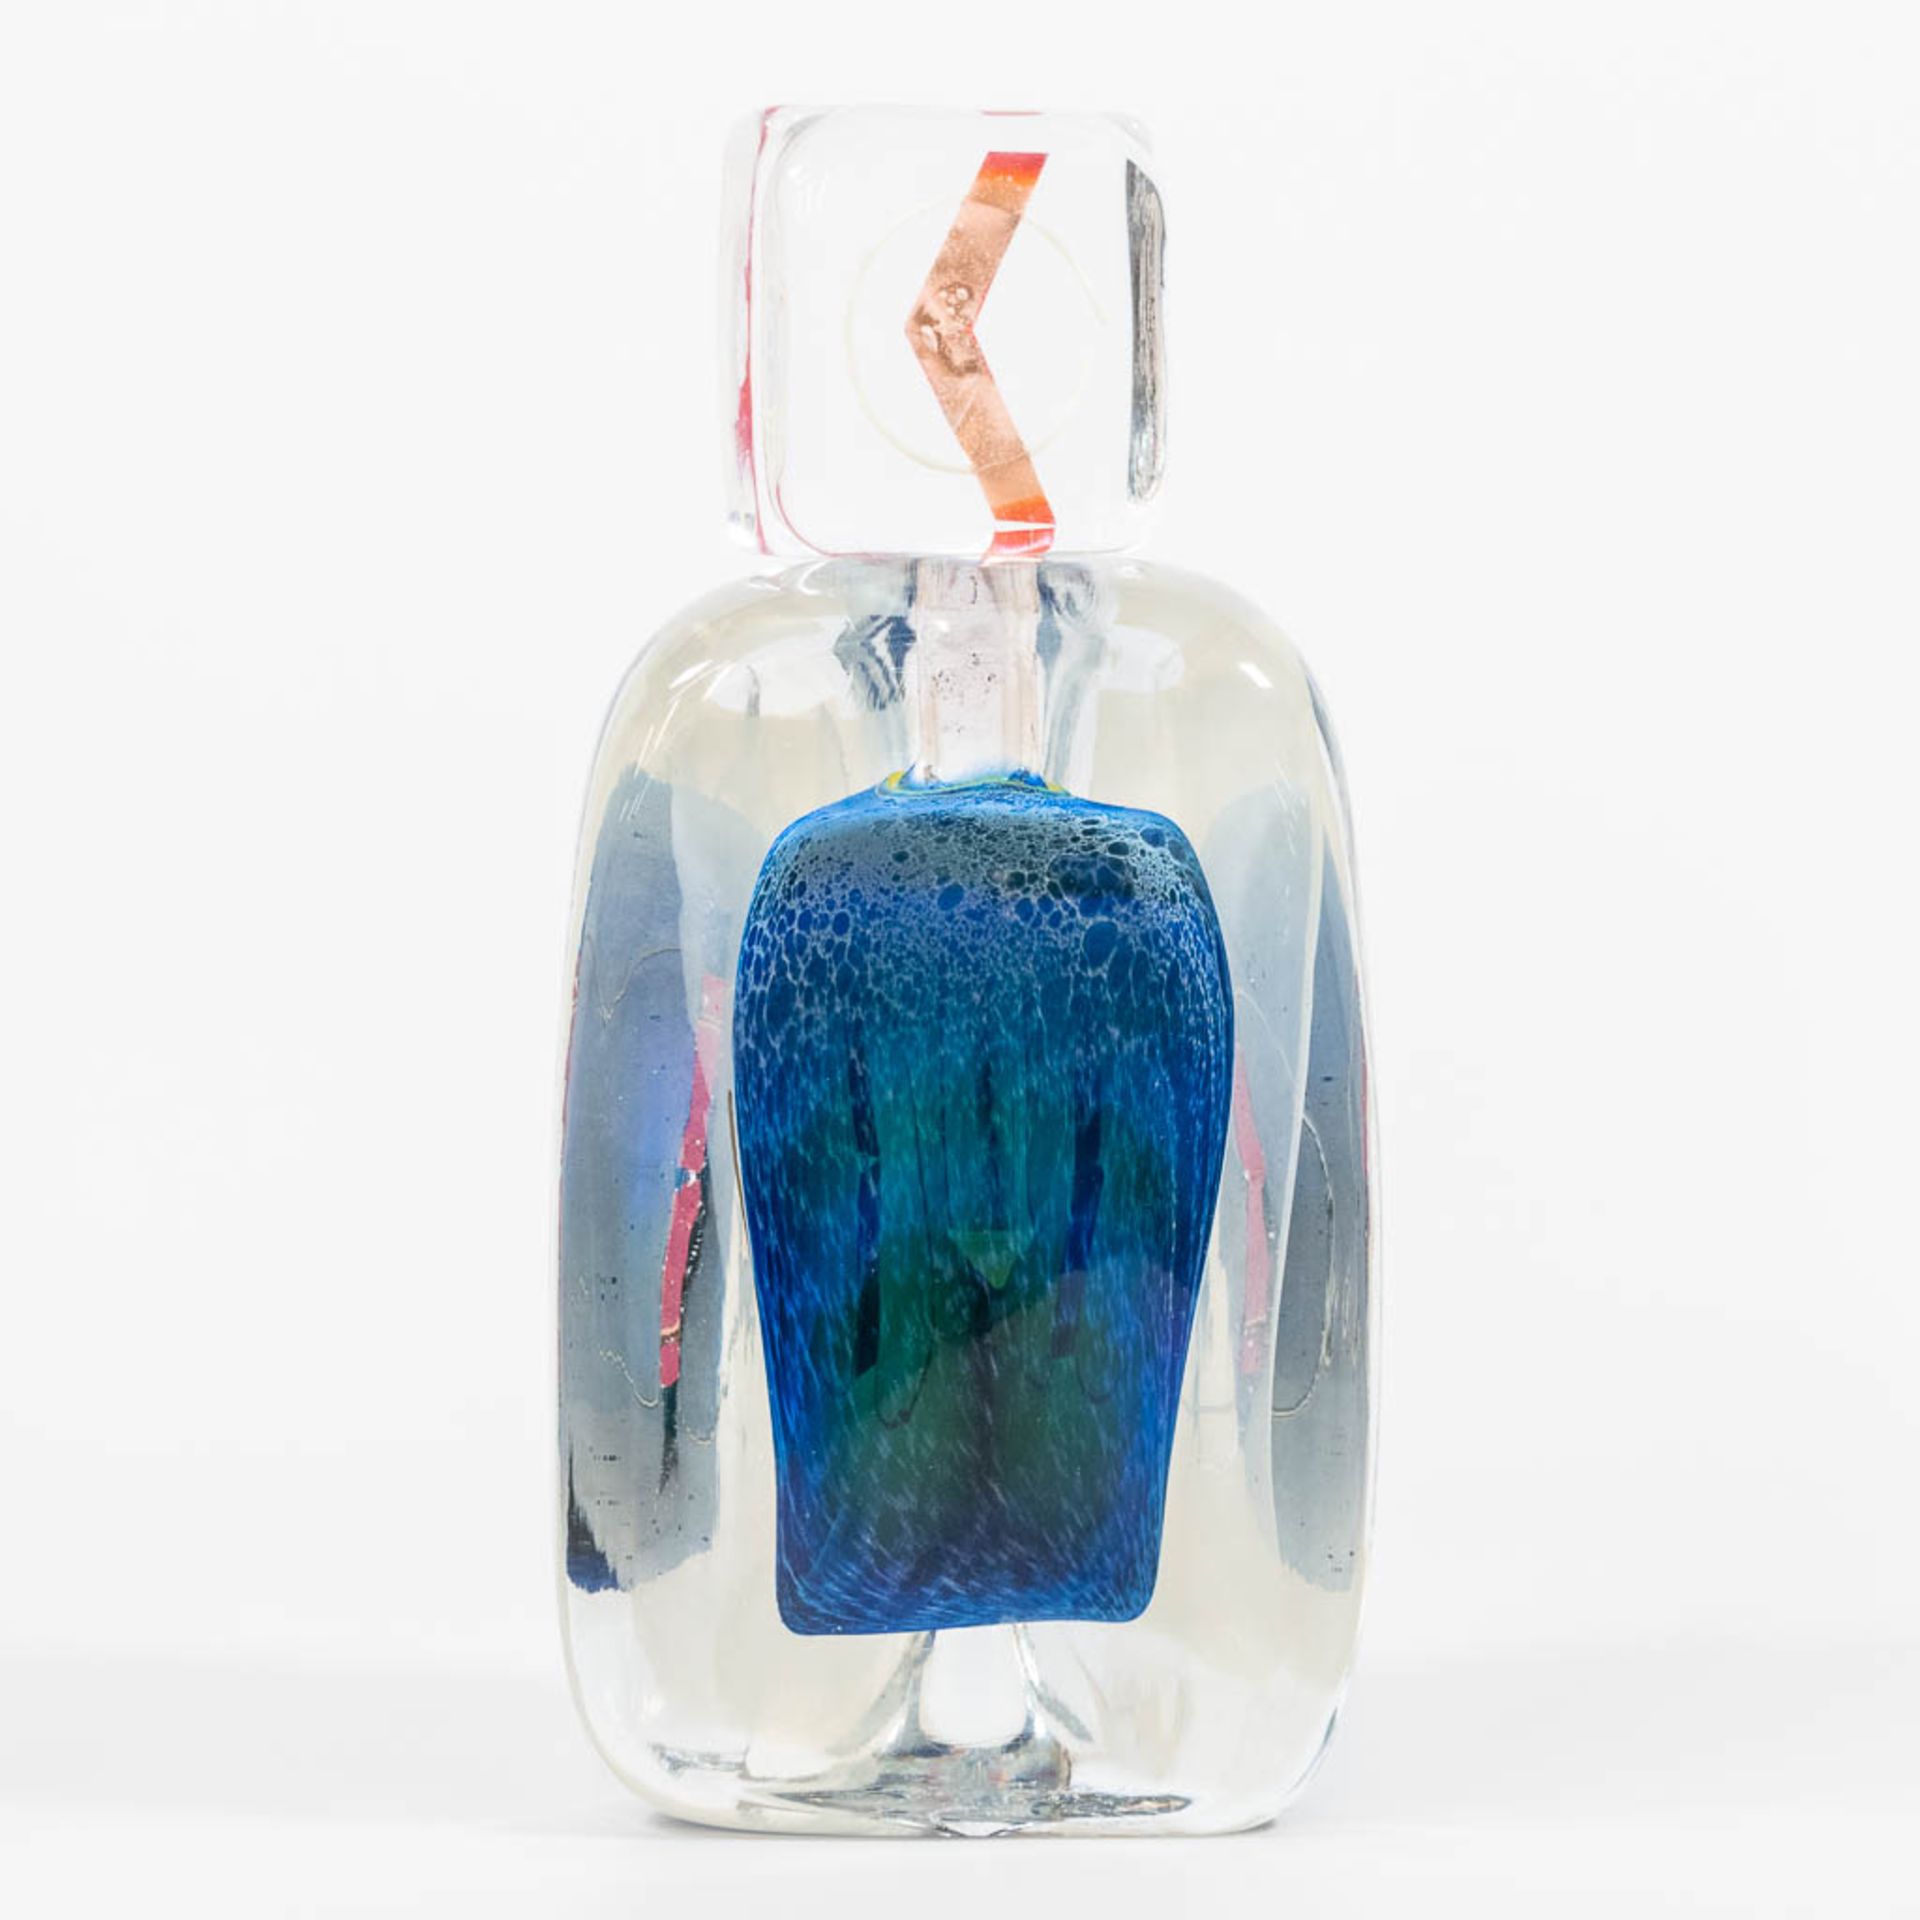 Nicolas MORIN (1959) A studio glass vase with stopper, marked on the base 2004. (9 x 10 x 21,5 cm) - Image 11 of 12